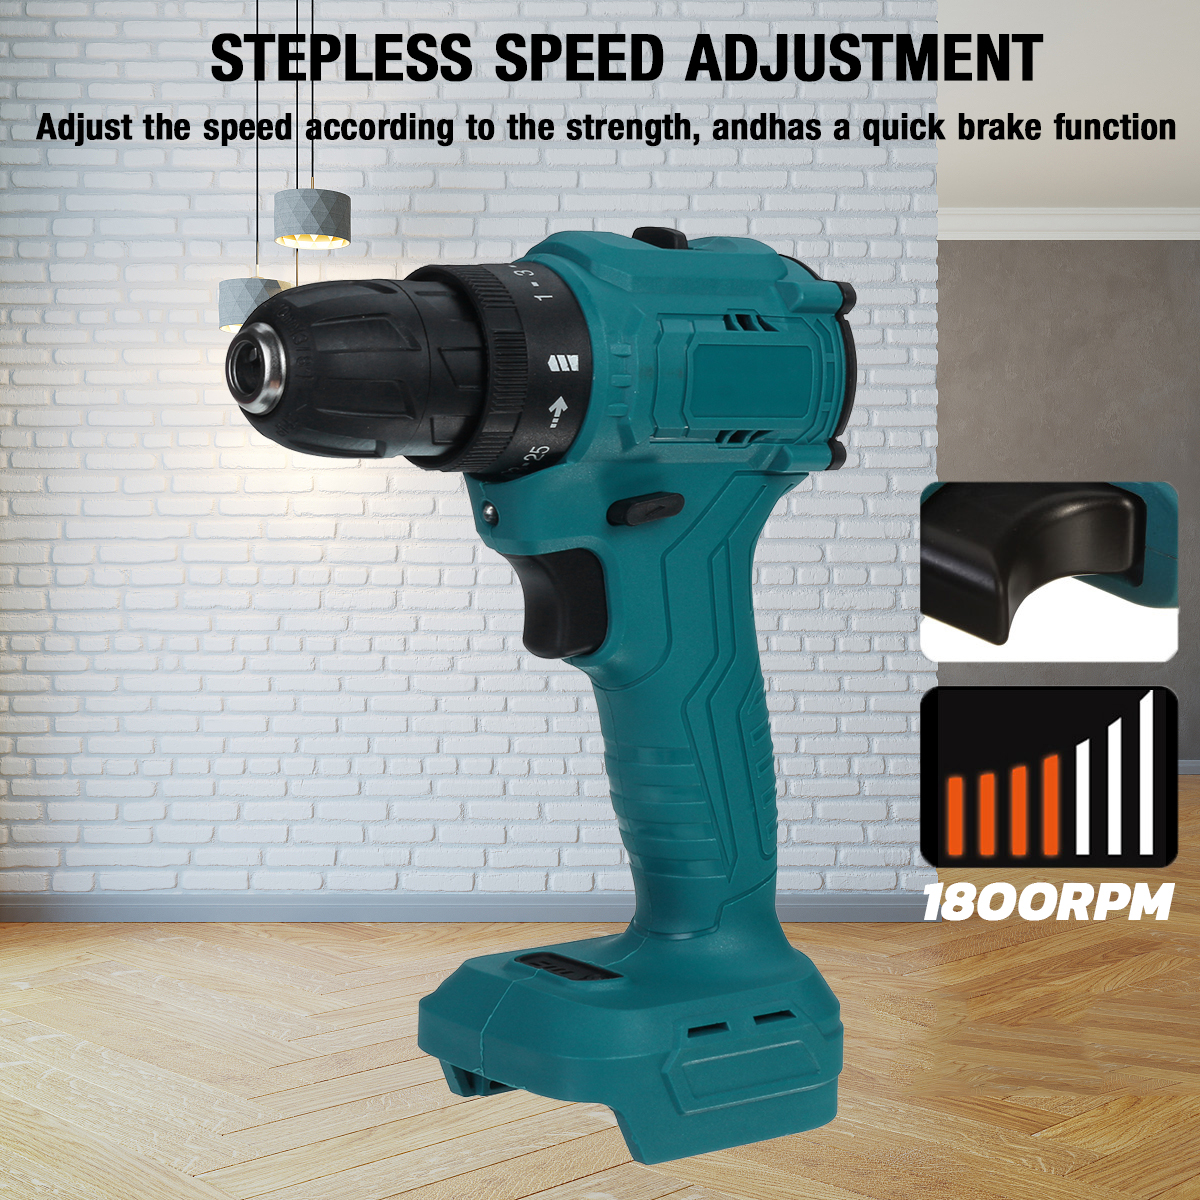 350Nm-1800rpm-Brushless-Electric-Drill-LED-Rechargeable-Power-Drill-For-Makita-18V-Battery-1735667-3